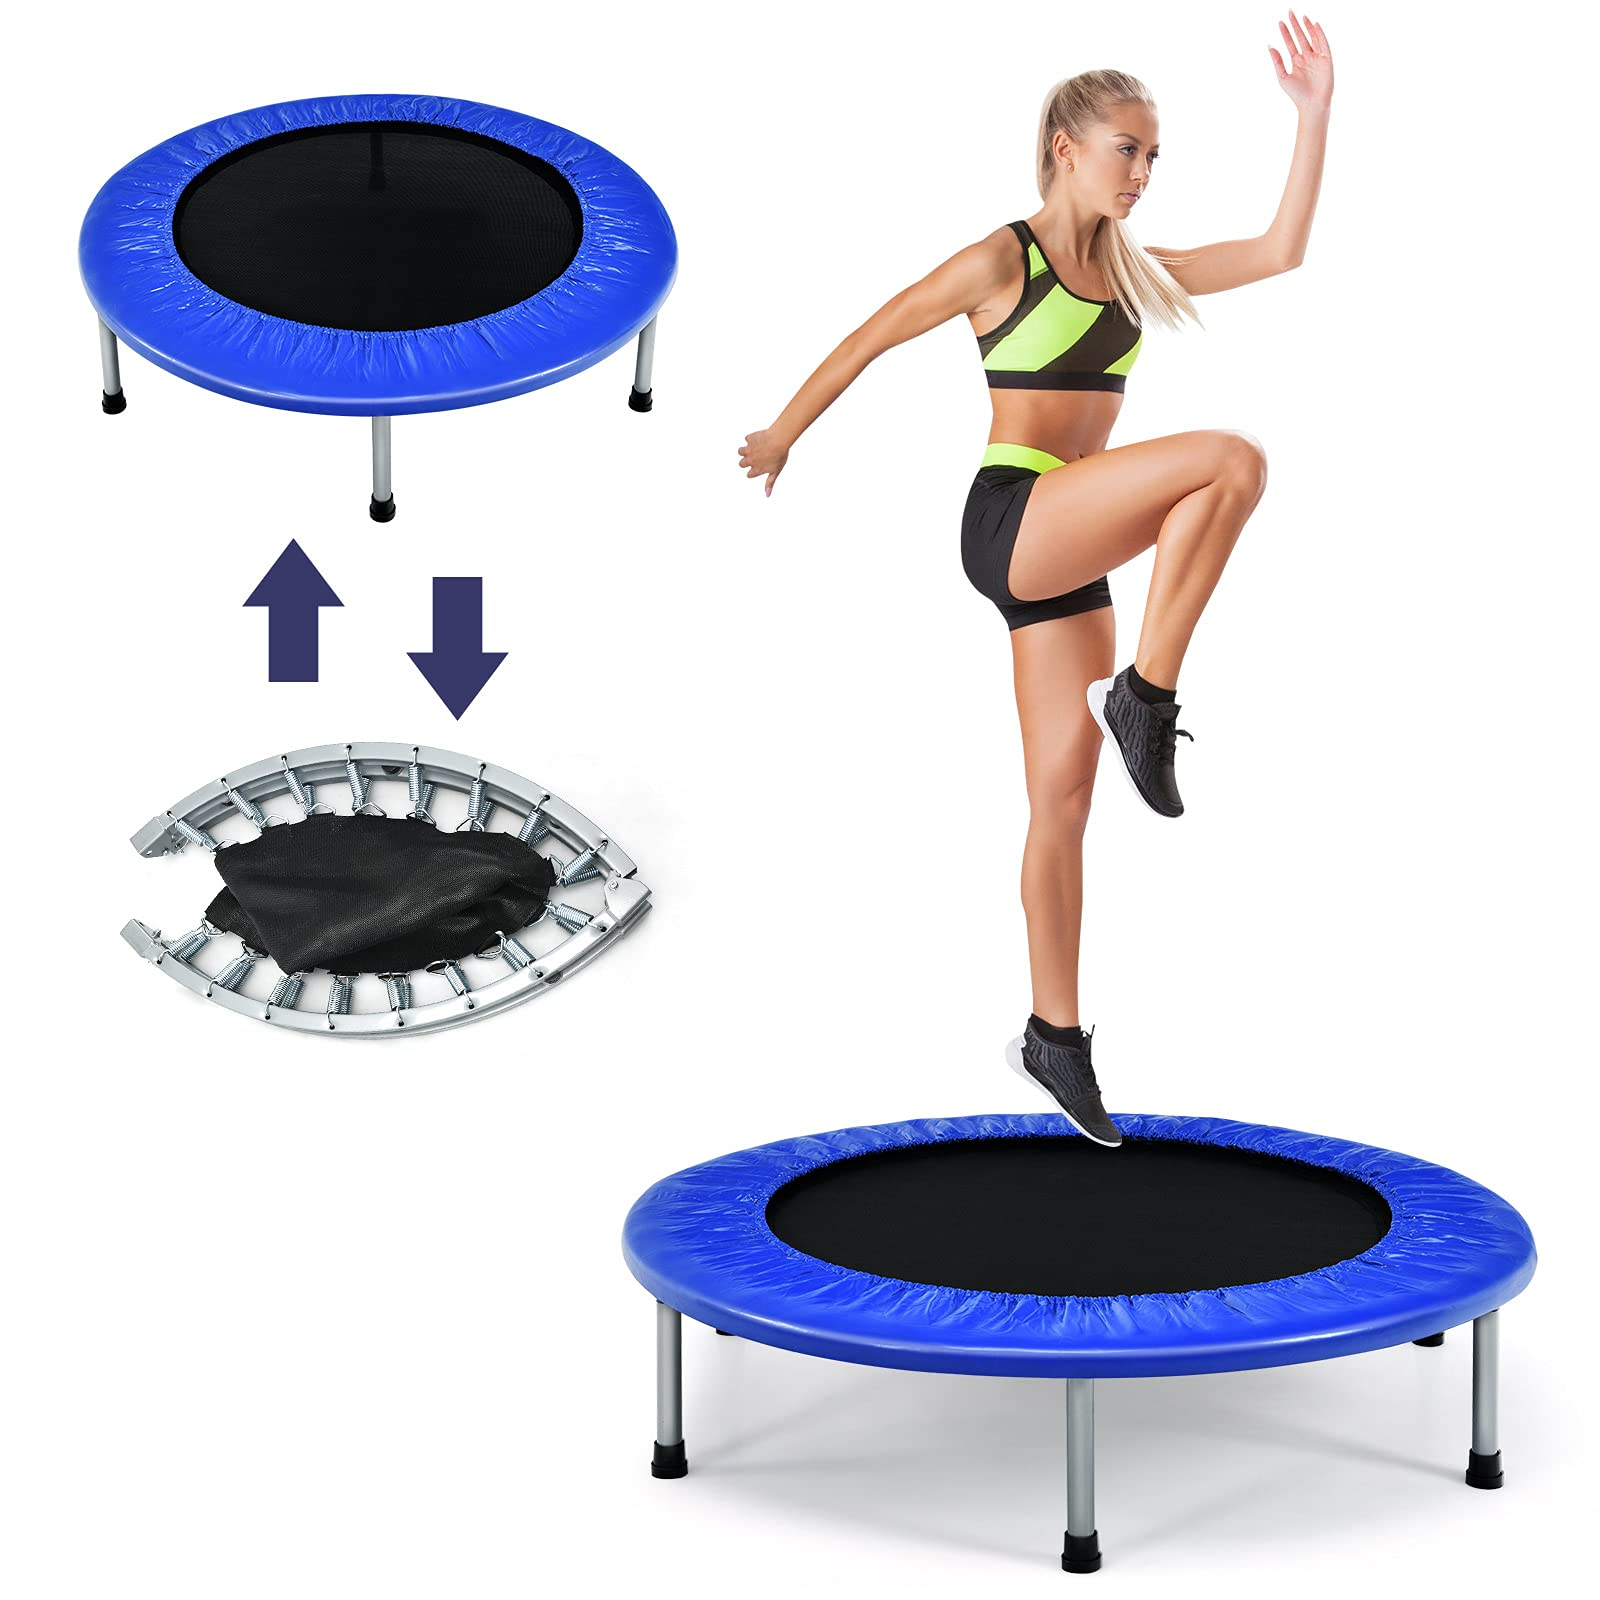 Portable Recreational Fitness Trampoline for Adults Kids